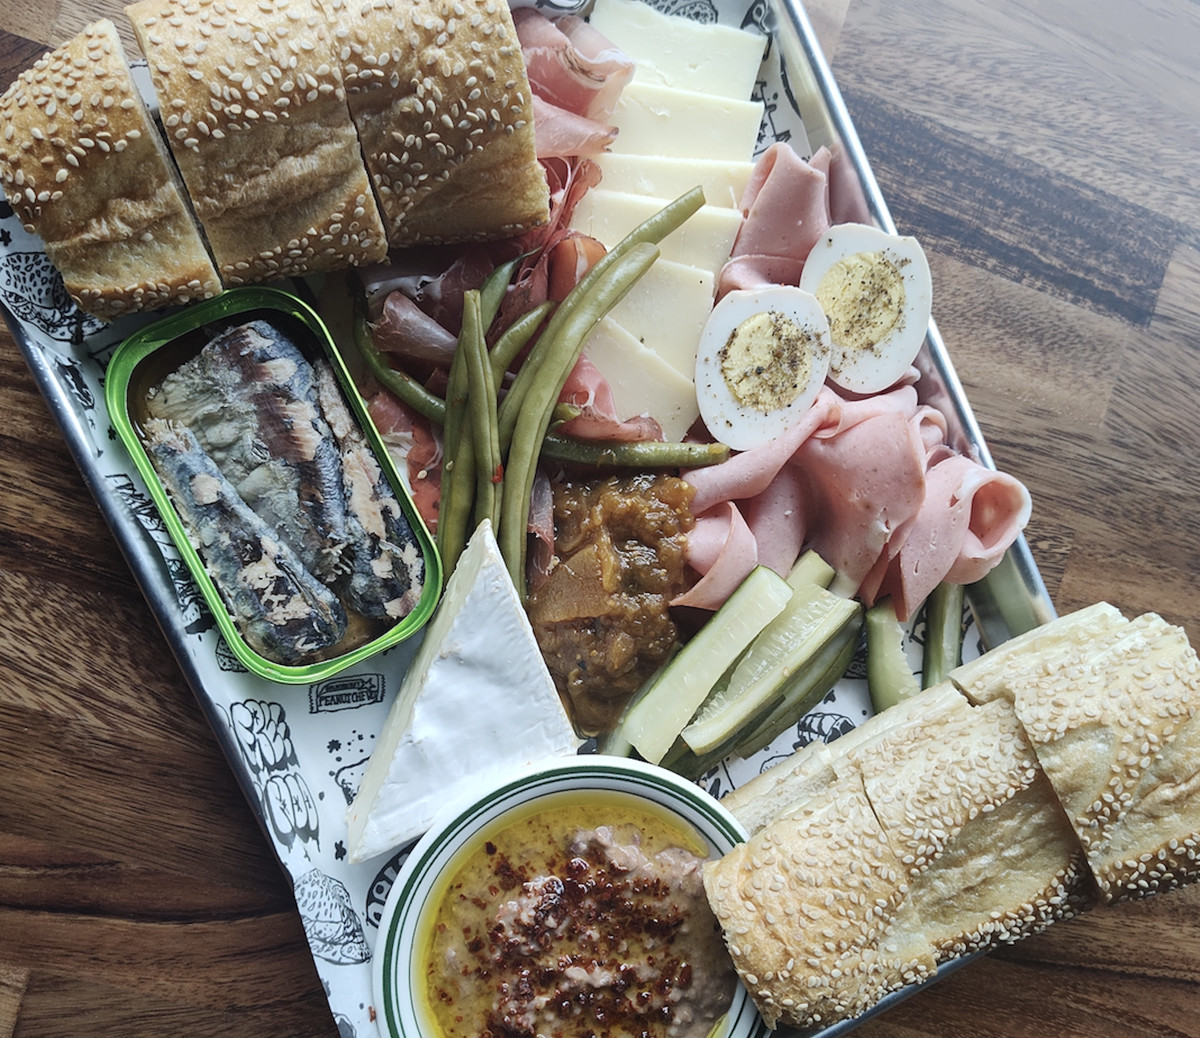 A platter with meats, cheeses, tinned fish, pickles, and bean dip.